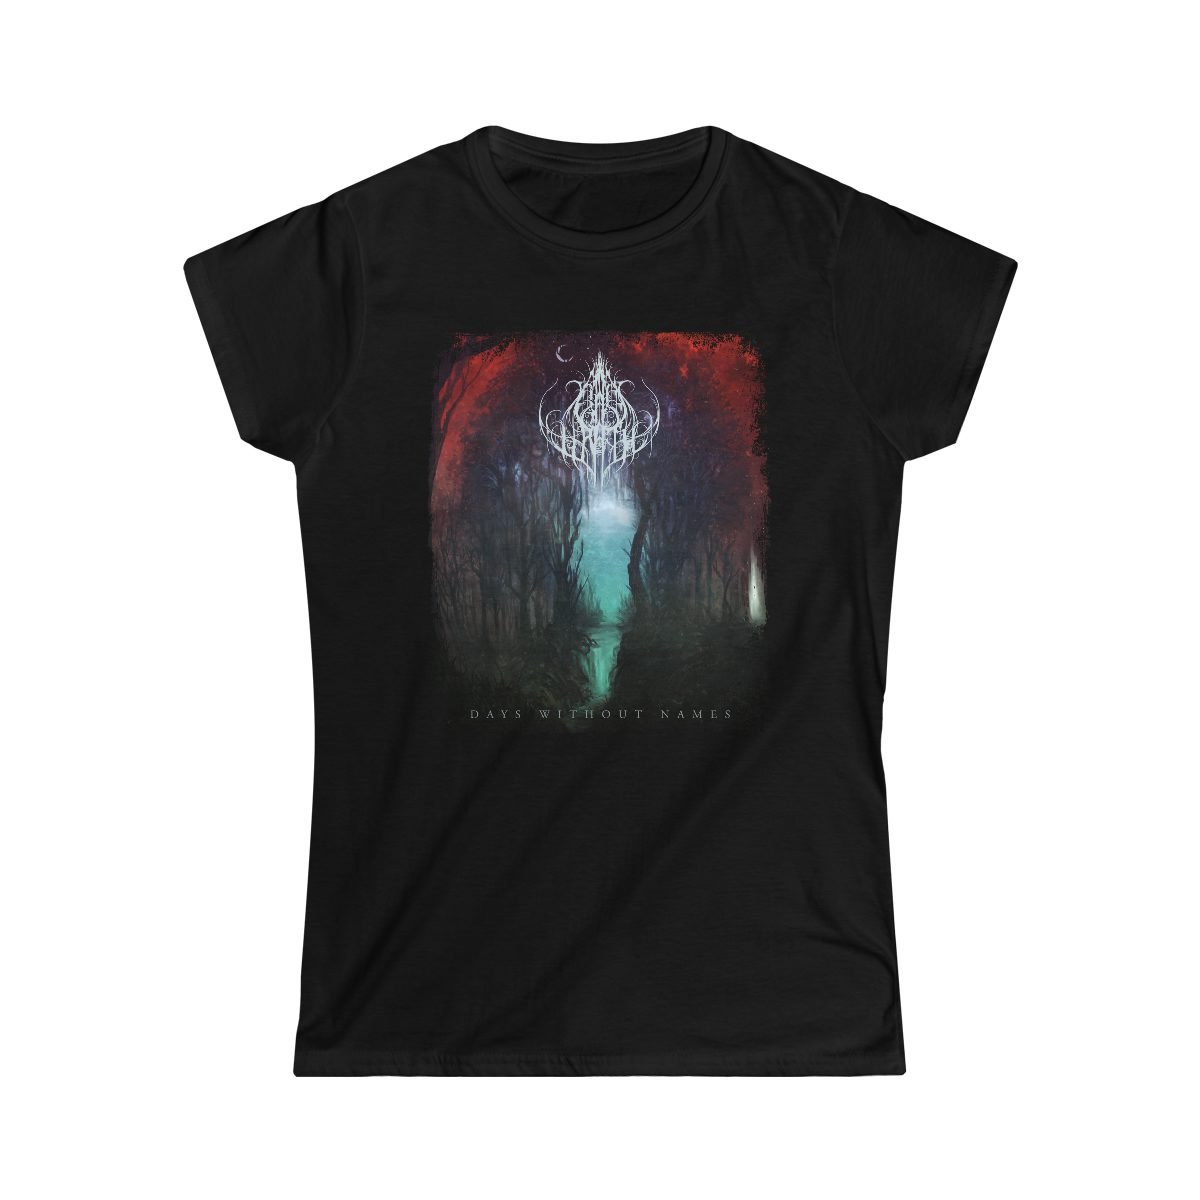 Vials of Wrath – Days Without Names Women’s Short Sleeve Tshirt 64000L